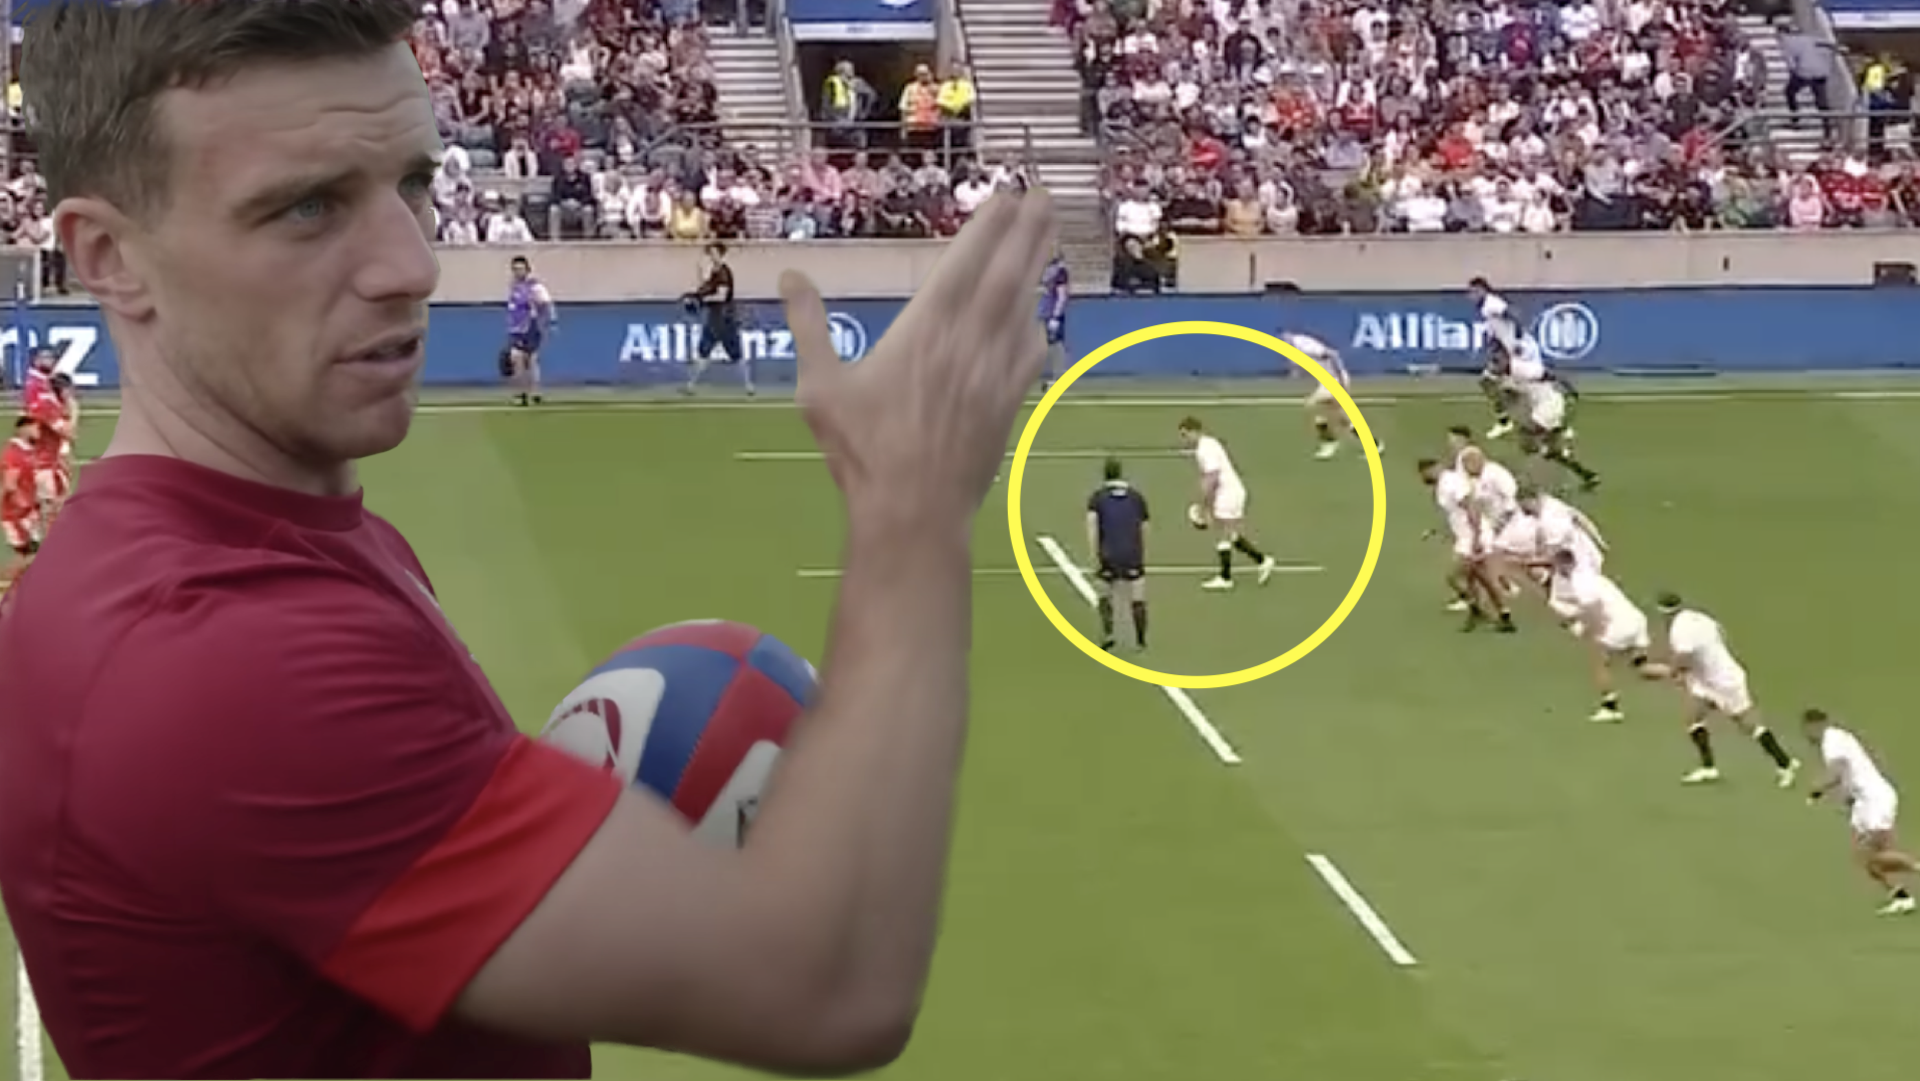 George Ford warned Wales of this exact move and they still could not handle it